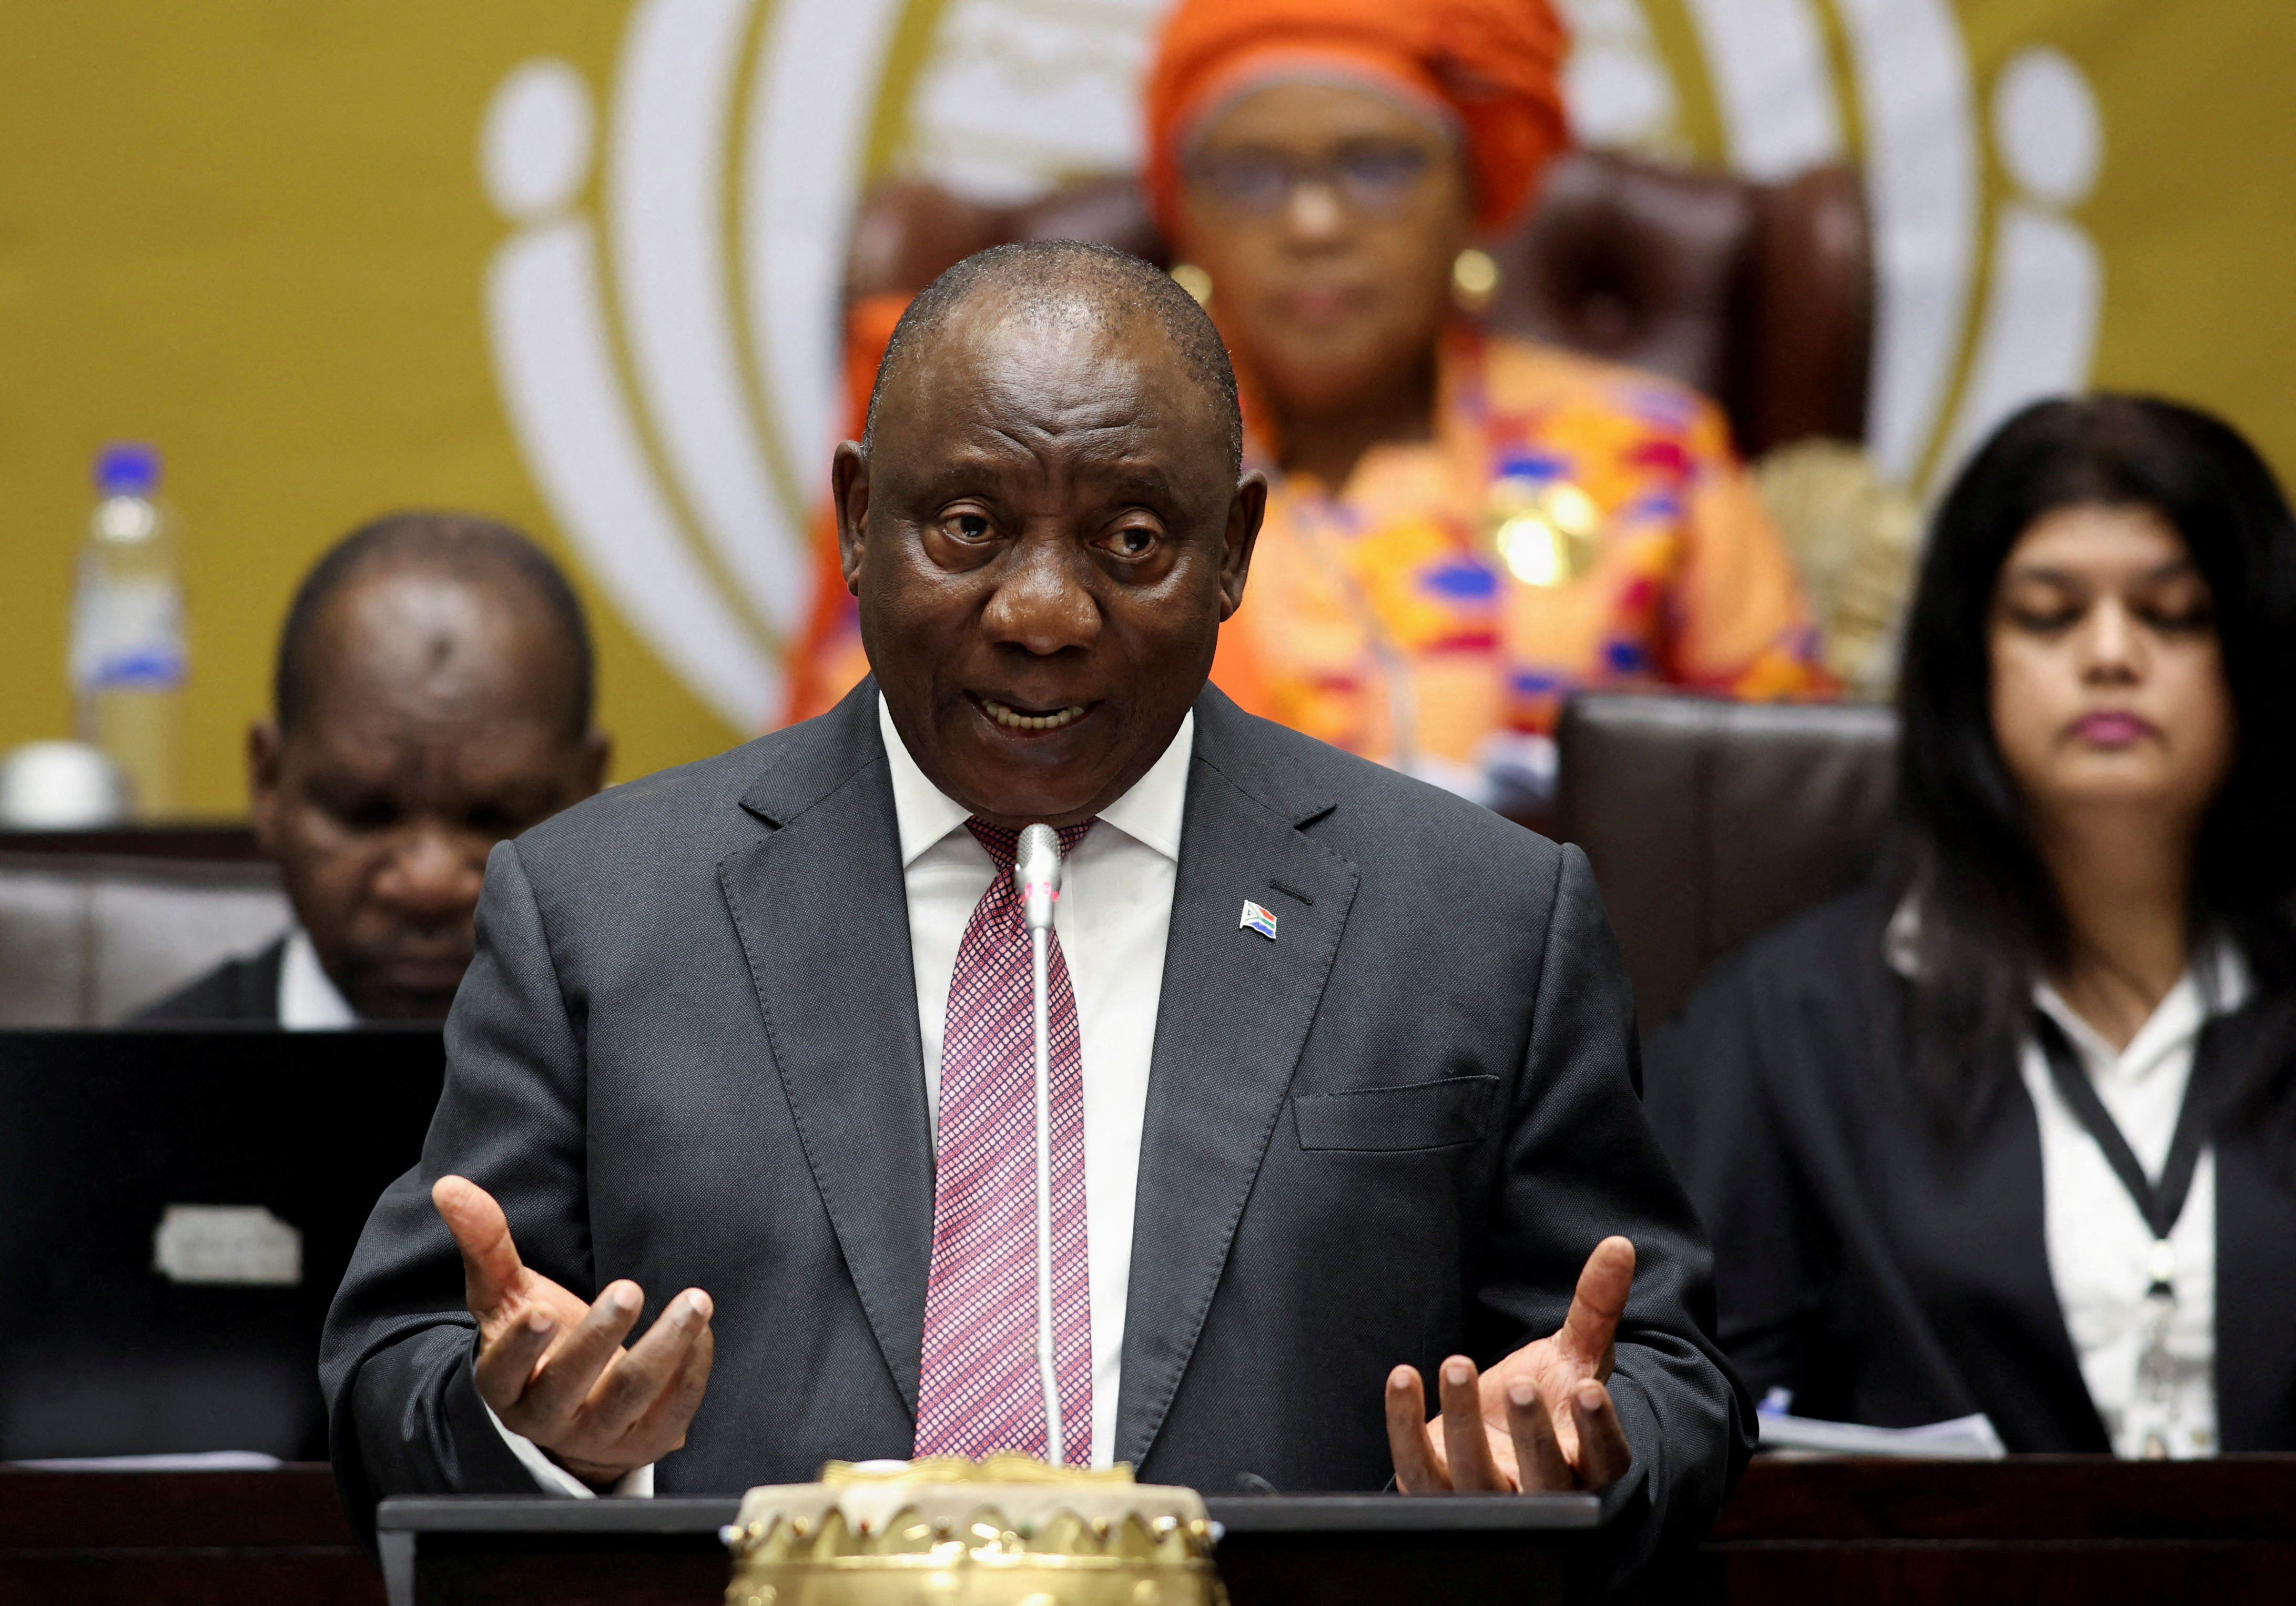 South African President Ramaphosa replies to questions in parliament in Cape Town